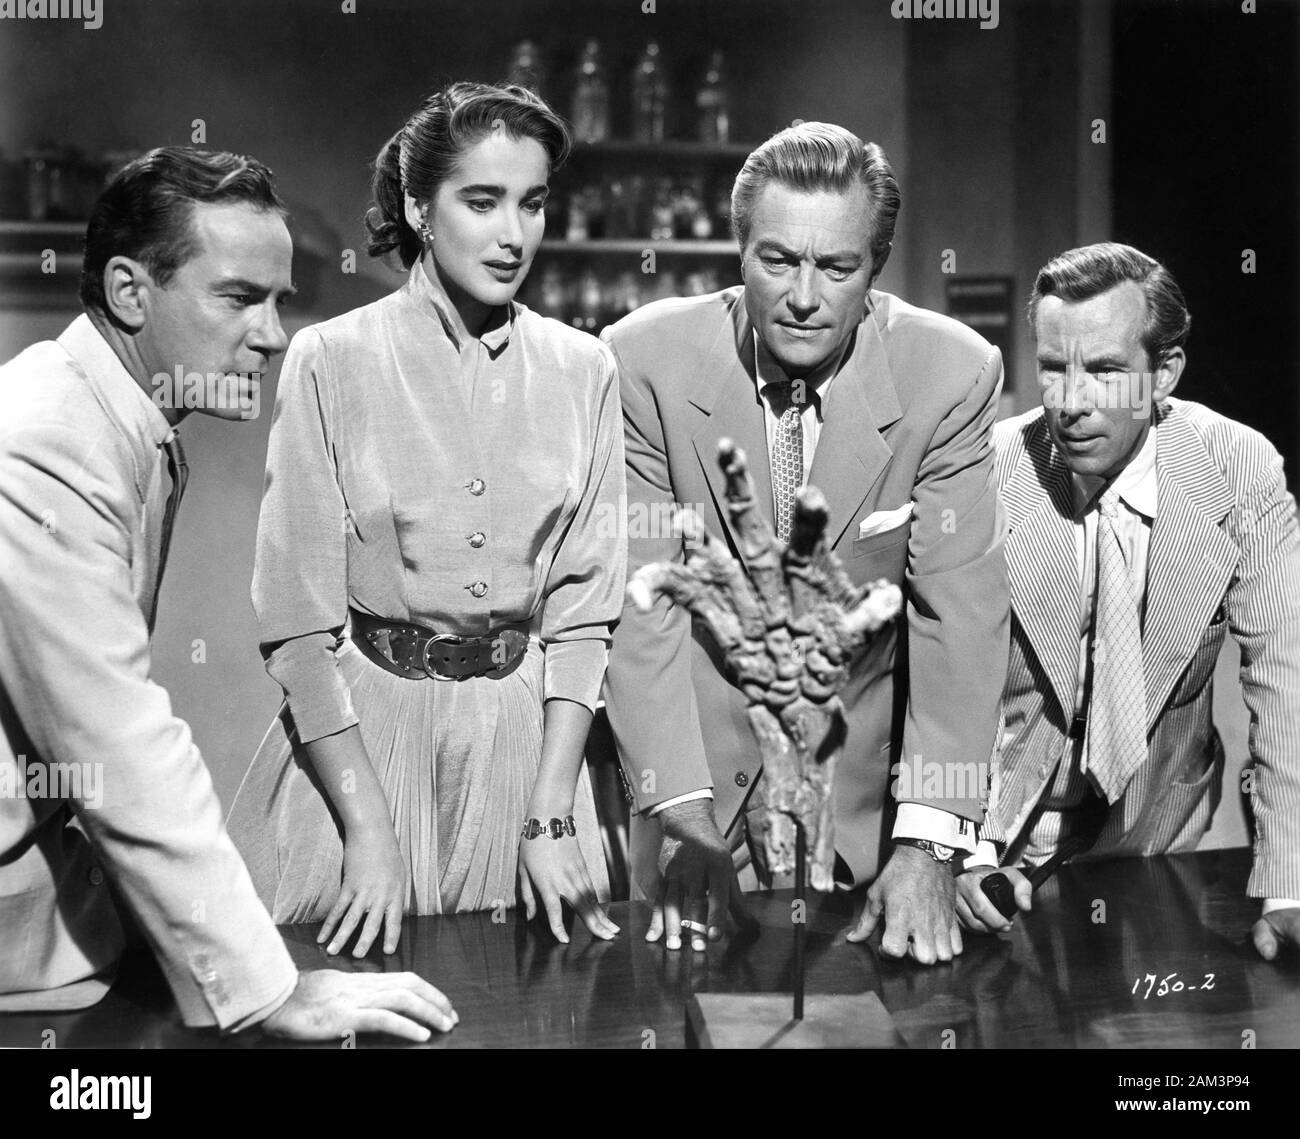 RICHARD CARLSON JULIE / JULIA ADAMS RICHARD DENNING and WHIT BISSELL in CREATURE FROM THE BLACK LAGOON 1954 director JACK ARNOLD filmed in 3D producer William Alland Universal International Pictures (UI) Stock Photo